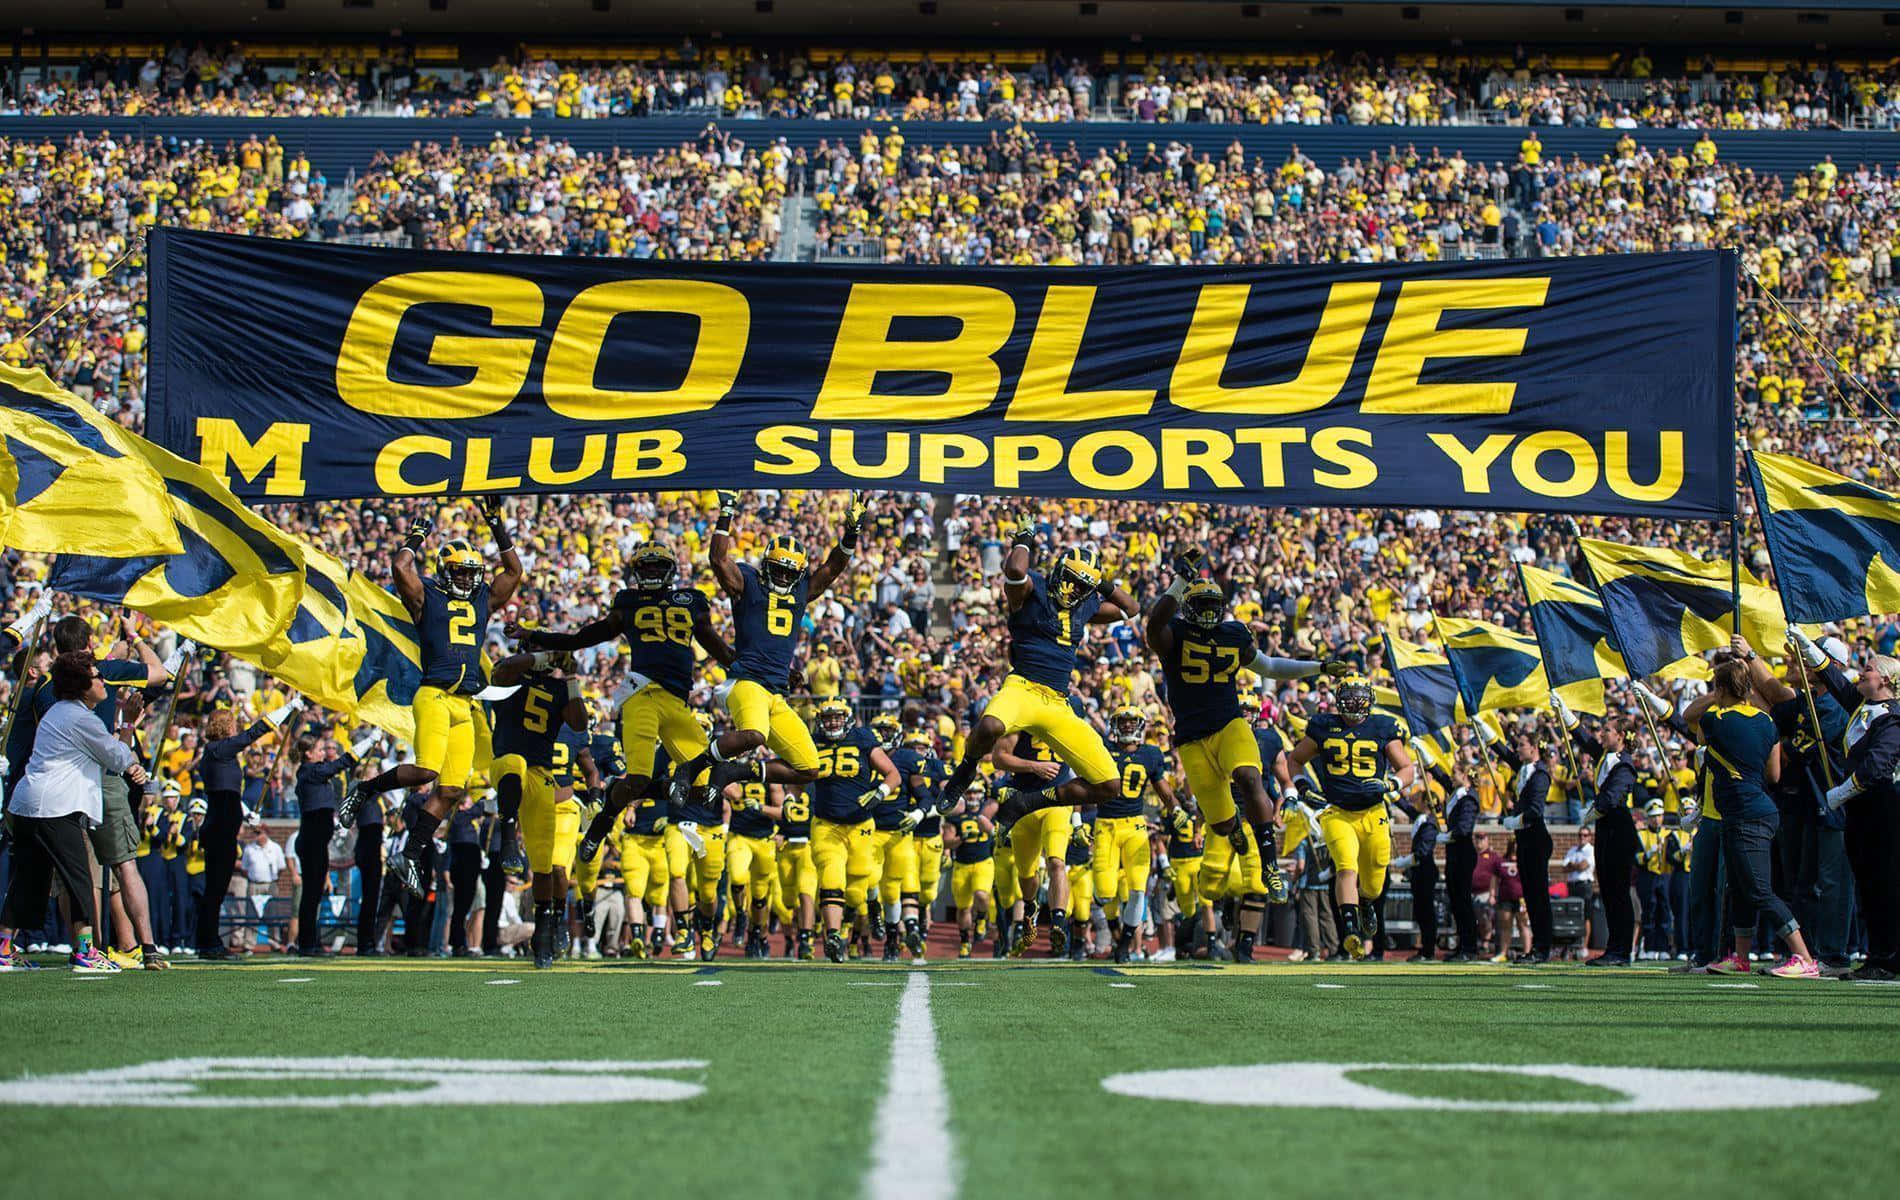 Explore the traditions of excellence at University Of Michigan Wallpaper